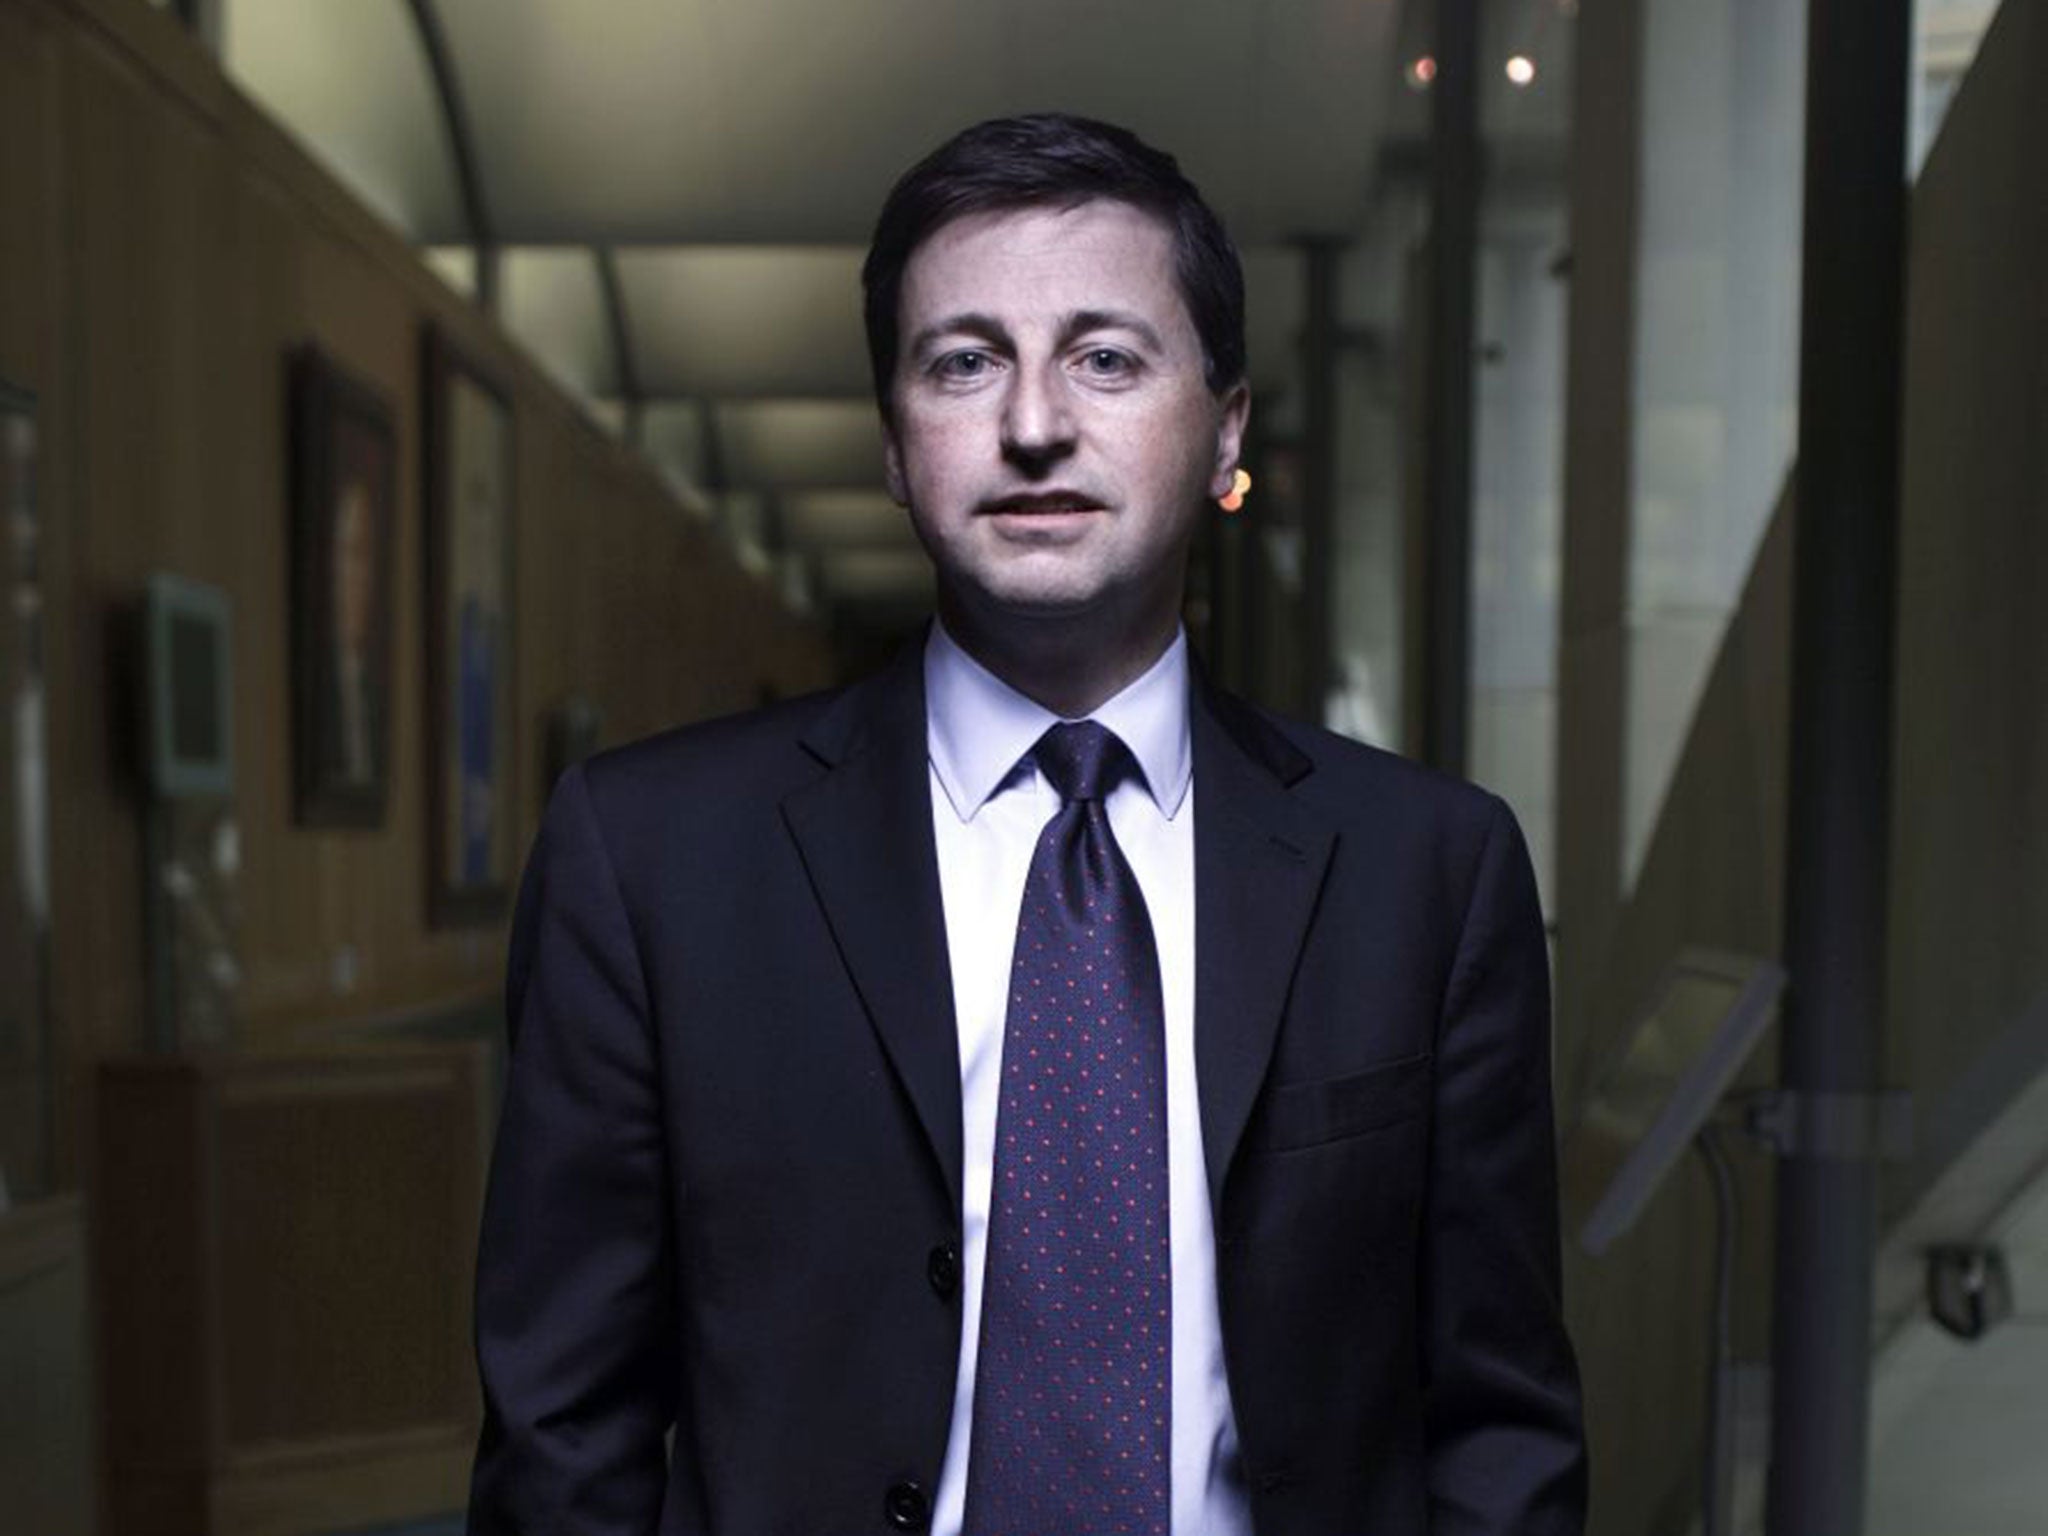 Douglas Alexander has received blame from within the party for co-ordinating an ineffective campaign (Justin Sutcliffe)